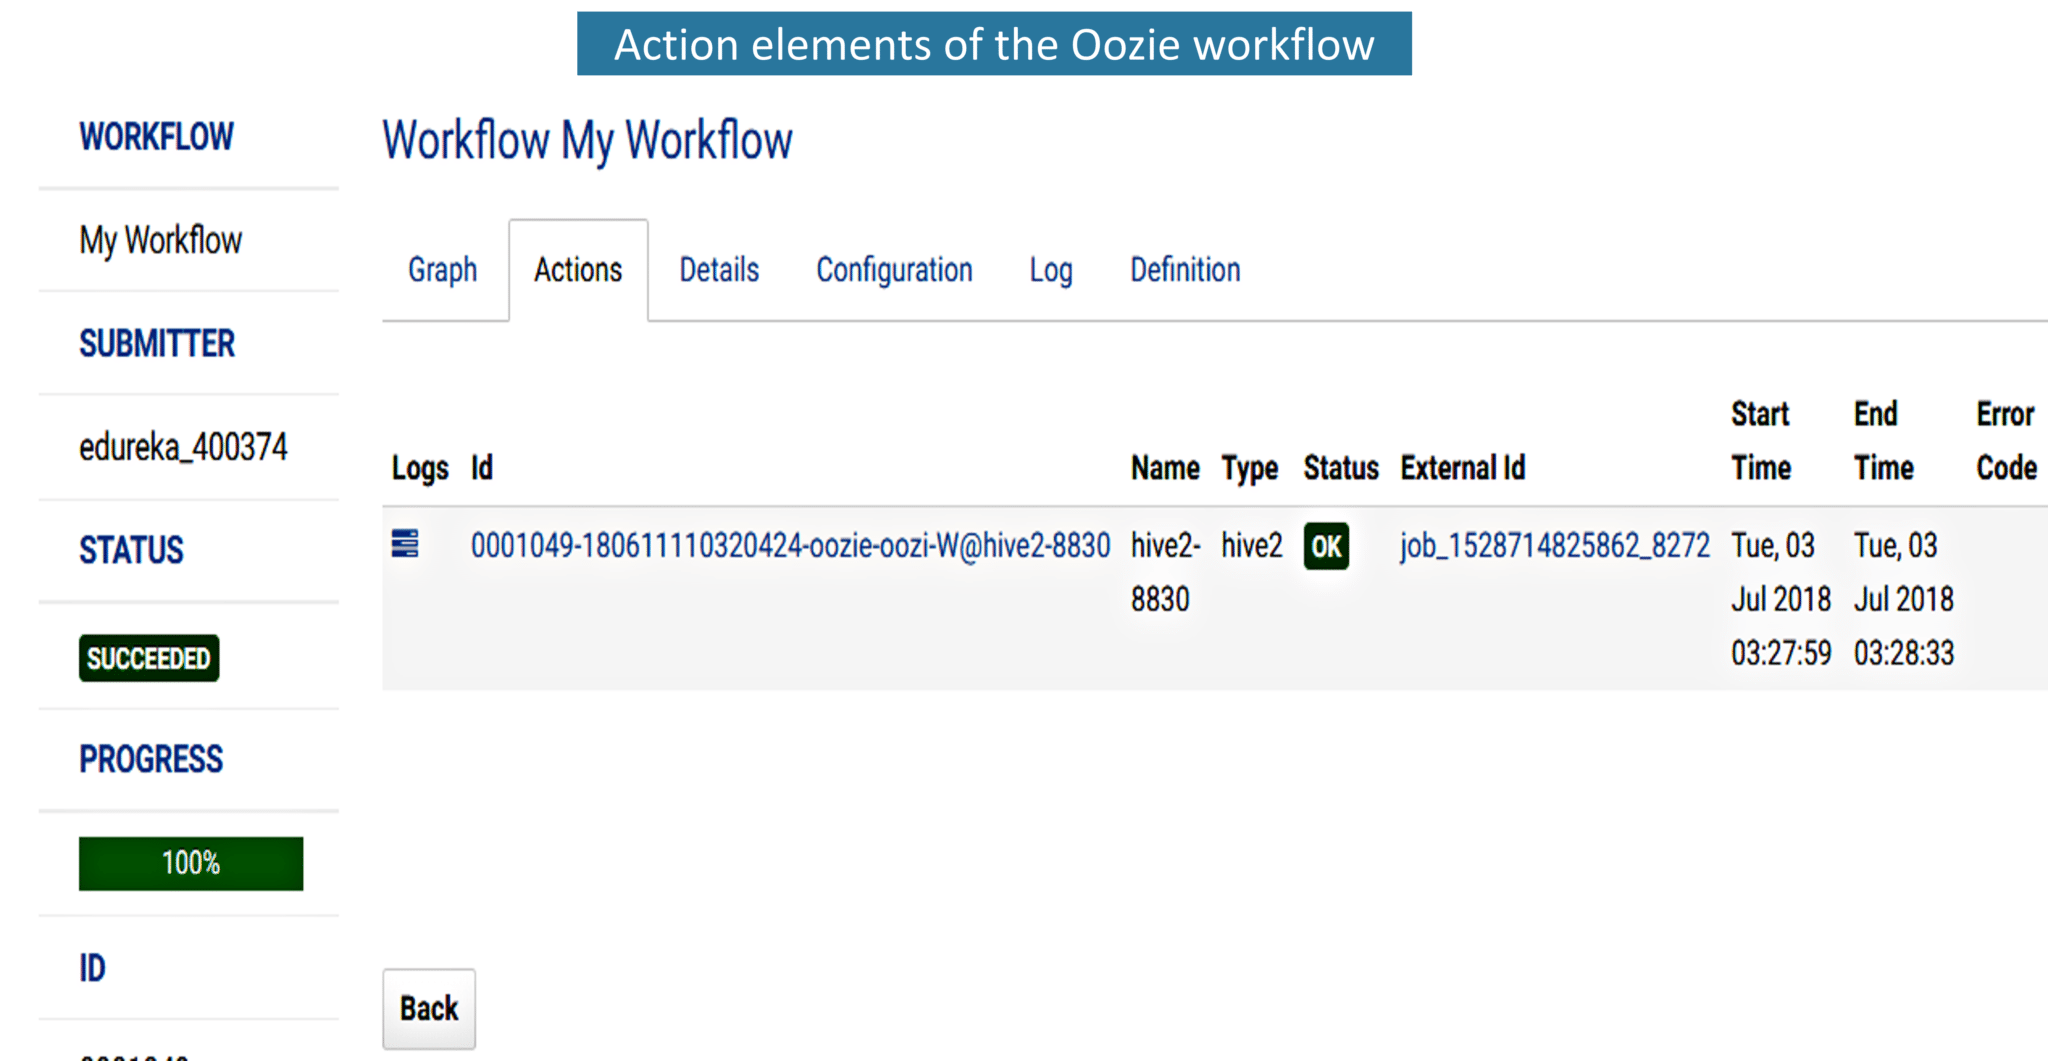  Fig: Elements present in the action tab of the Oozie workflow